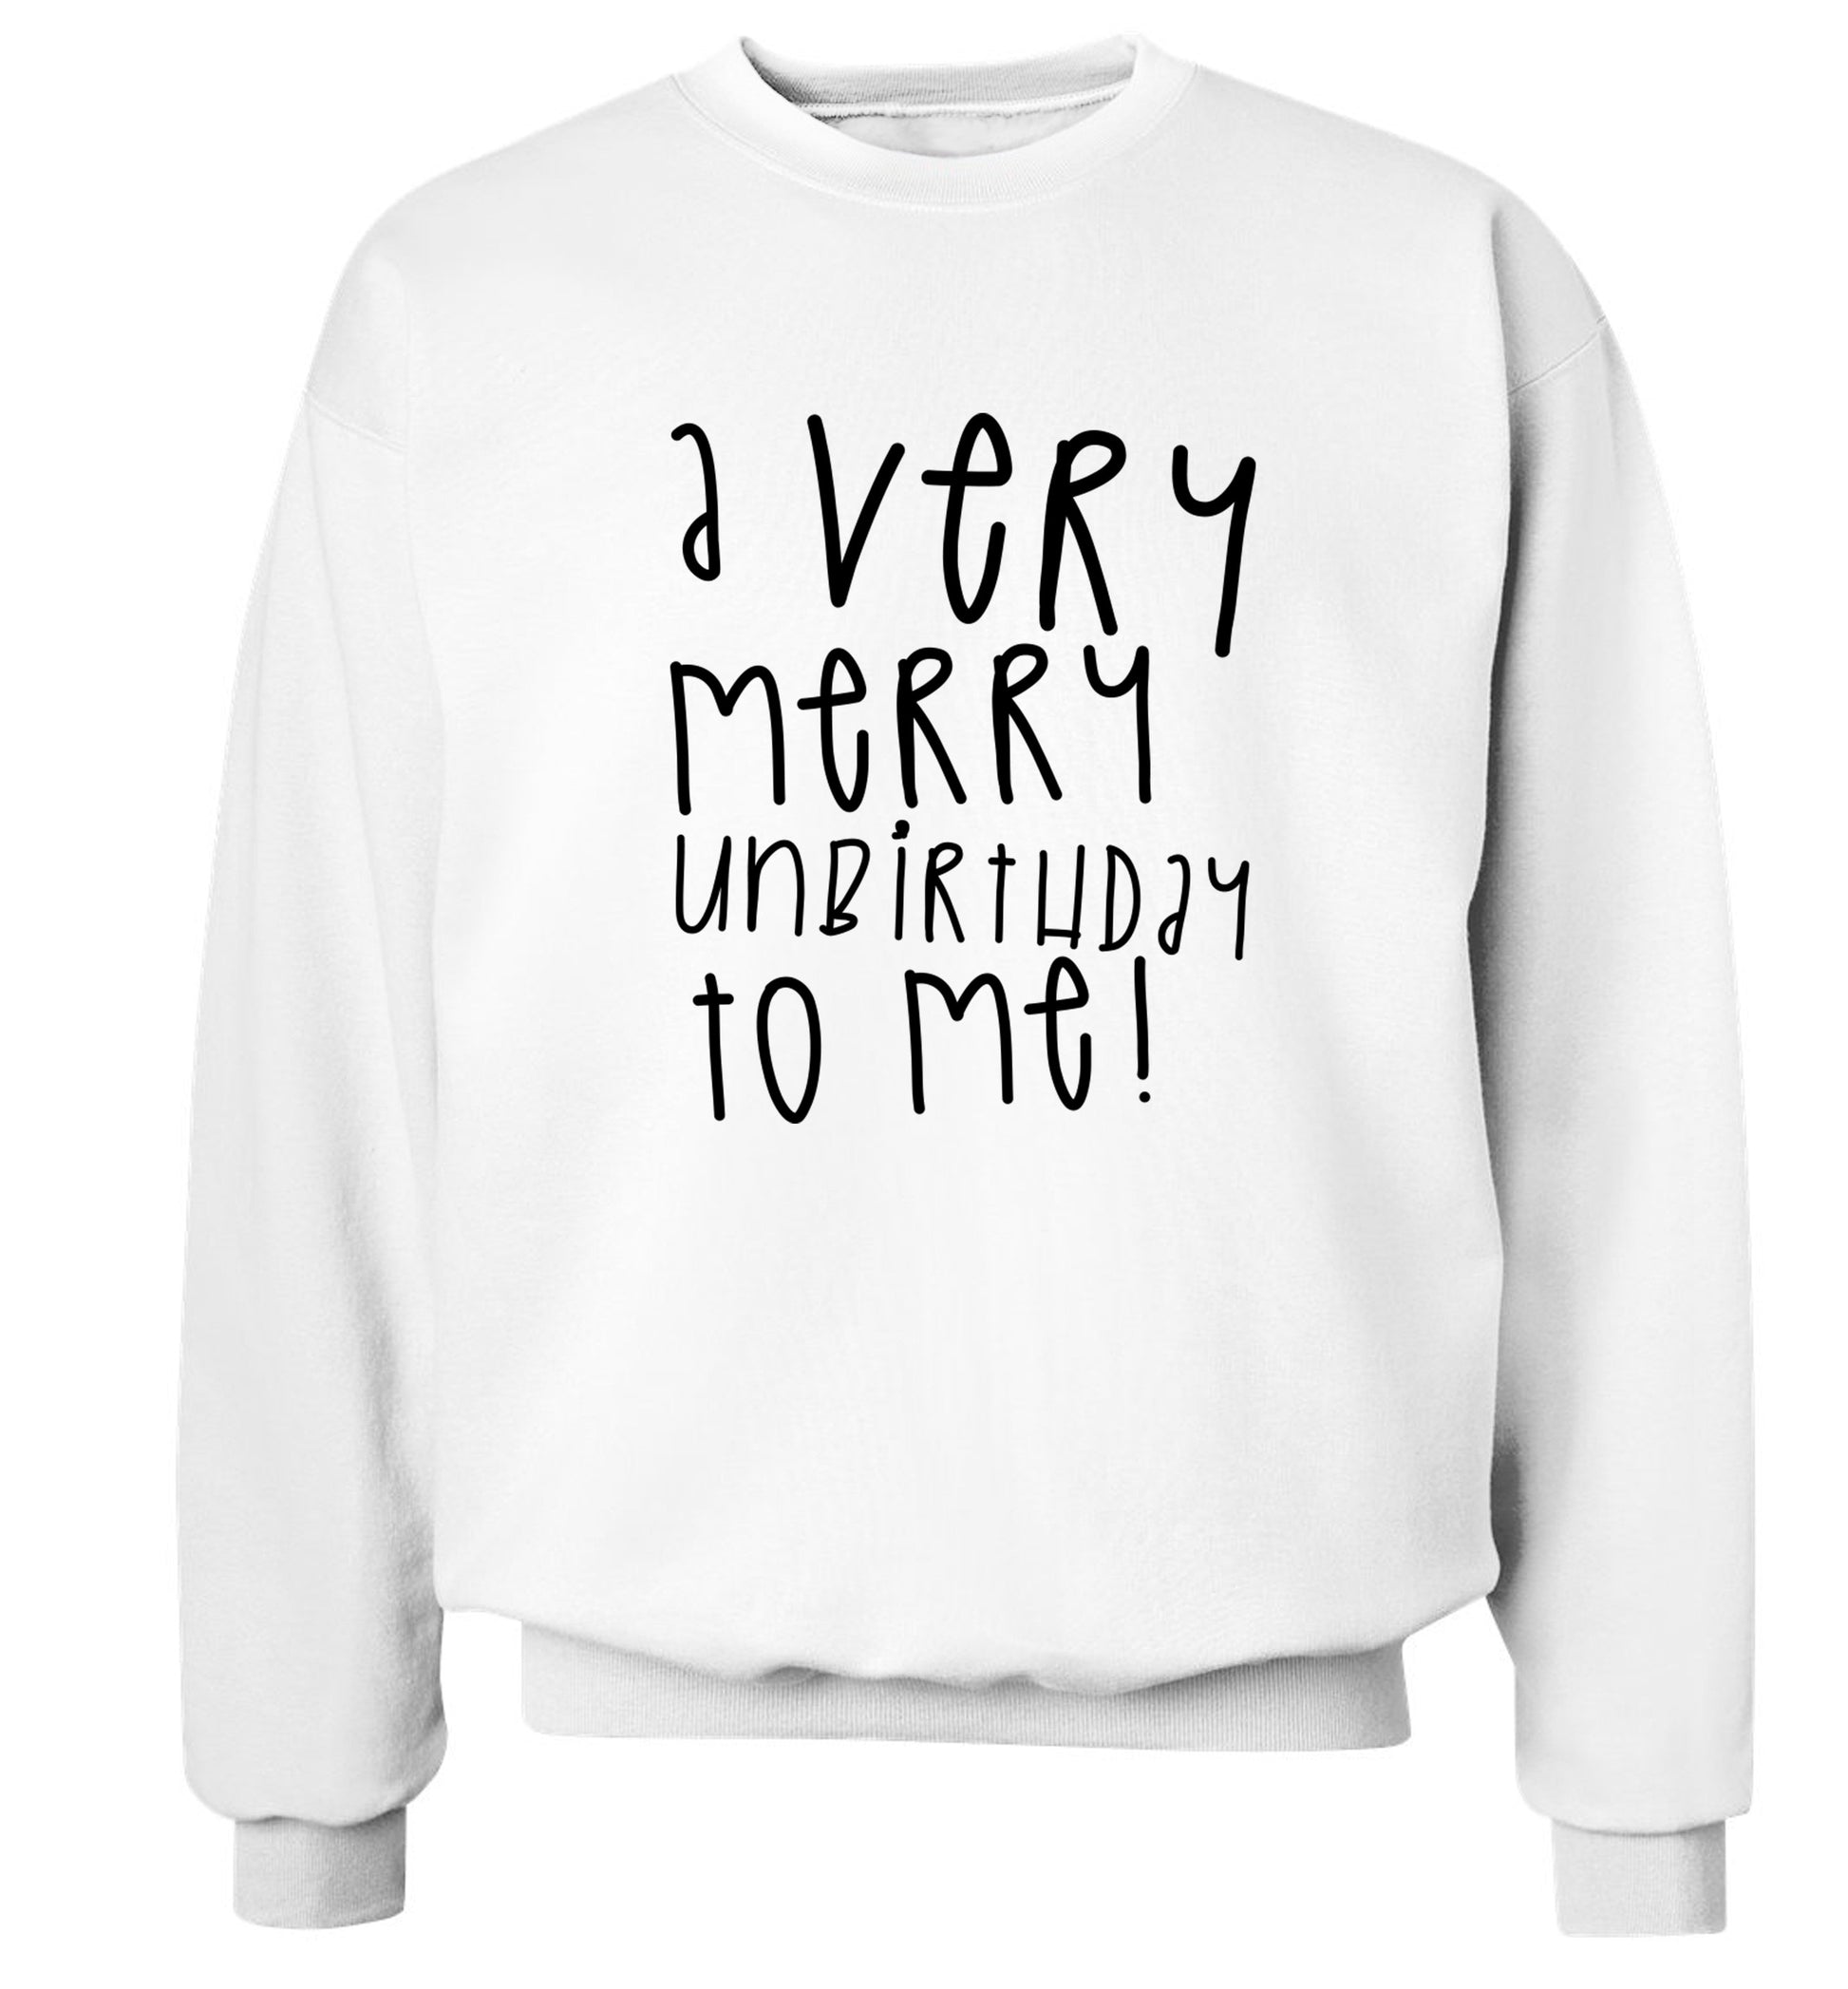 A very merry unbirthday to me! Adult's unisex white Sweater 2XL